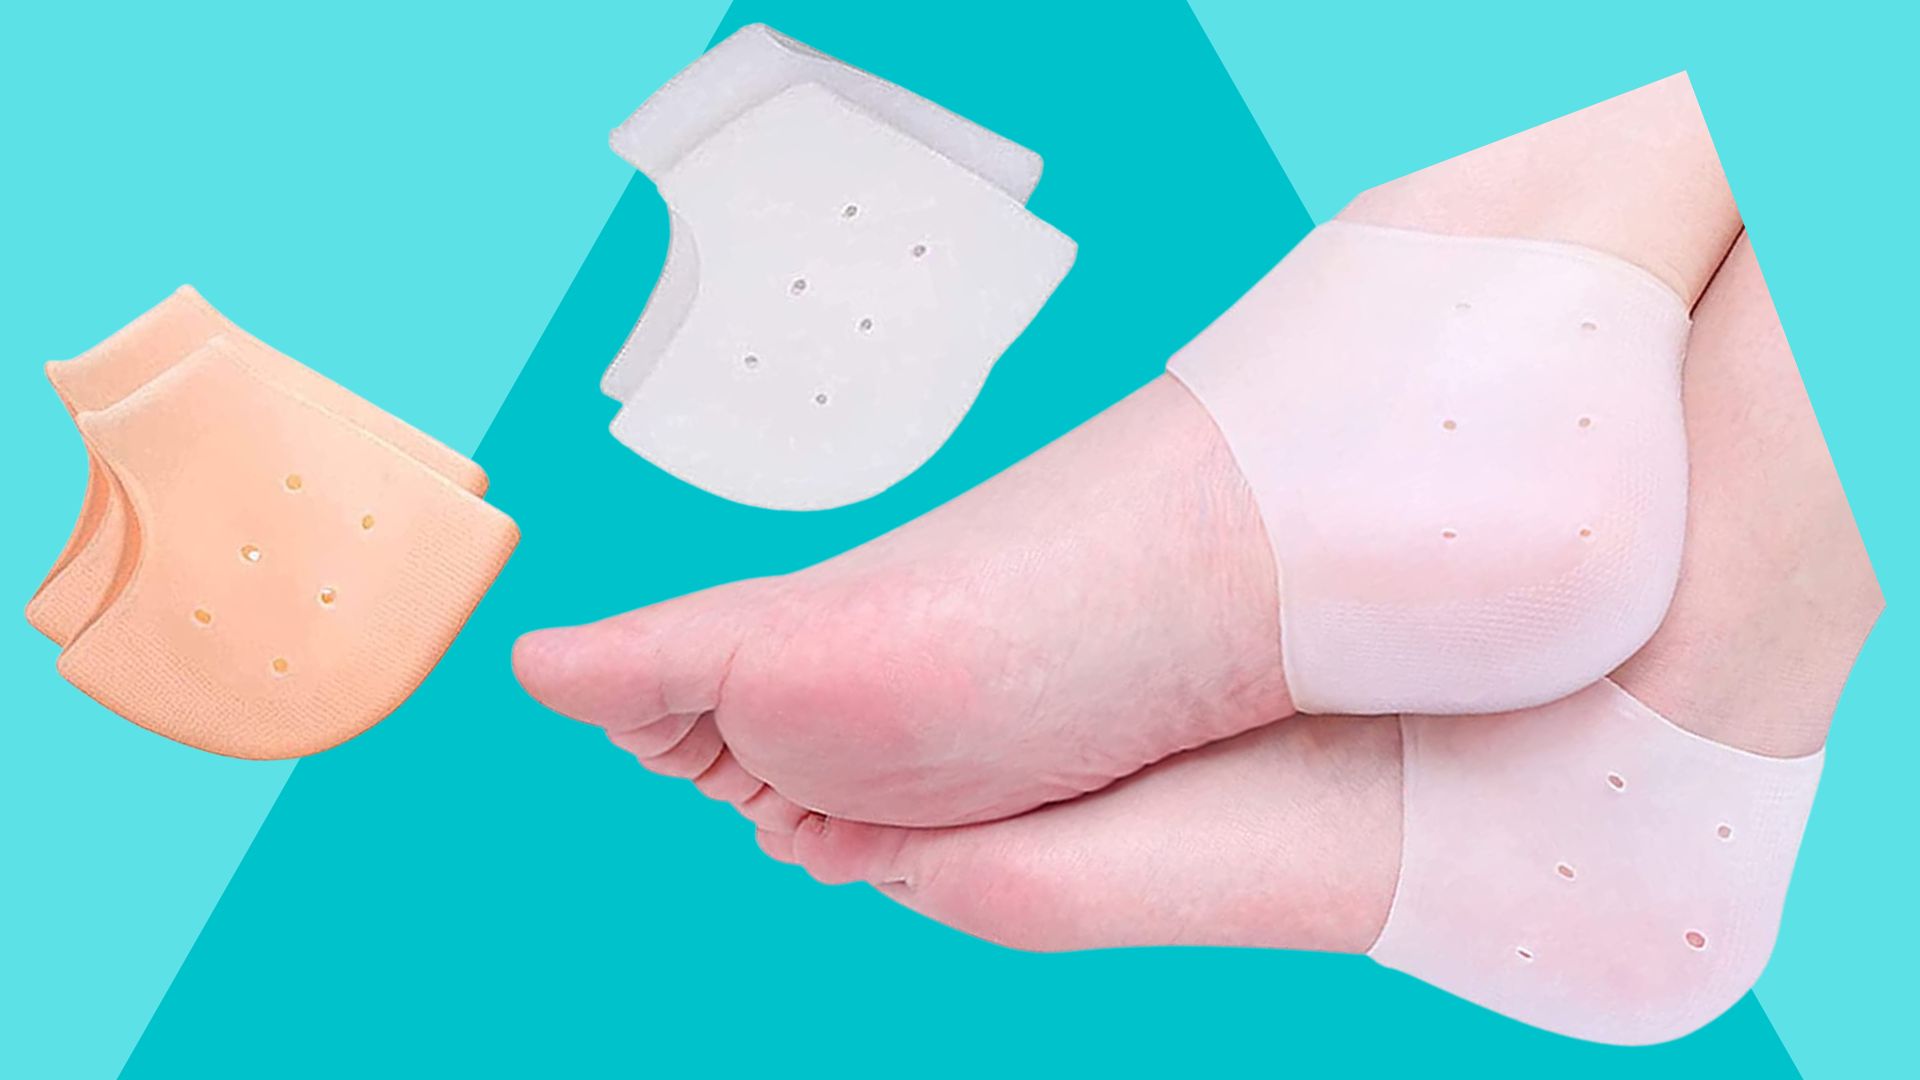 Buy PRShop it (Pack of 1) Heel Protectors Foam Padding Bandages Heel  Band-Aids for Blisters Prevention Runners Toes Finger Shoes Anti-Blister  Cushion High Heel Padded Waterproof First Aid Tape (1) Online at